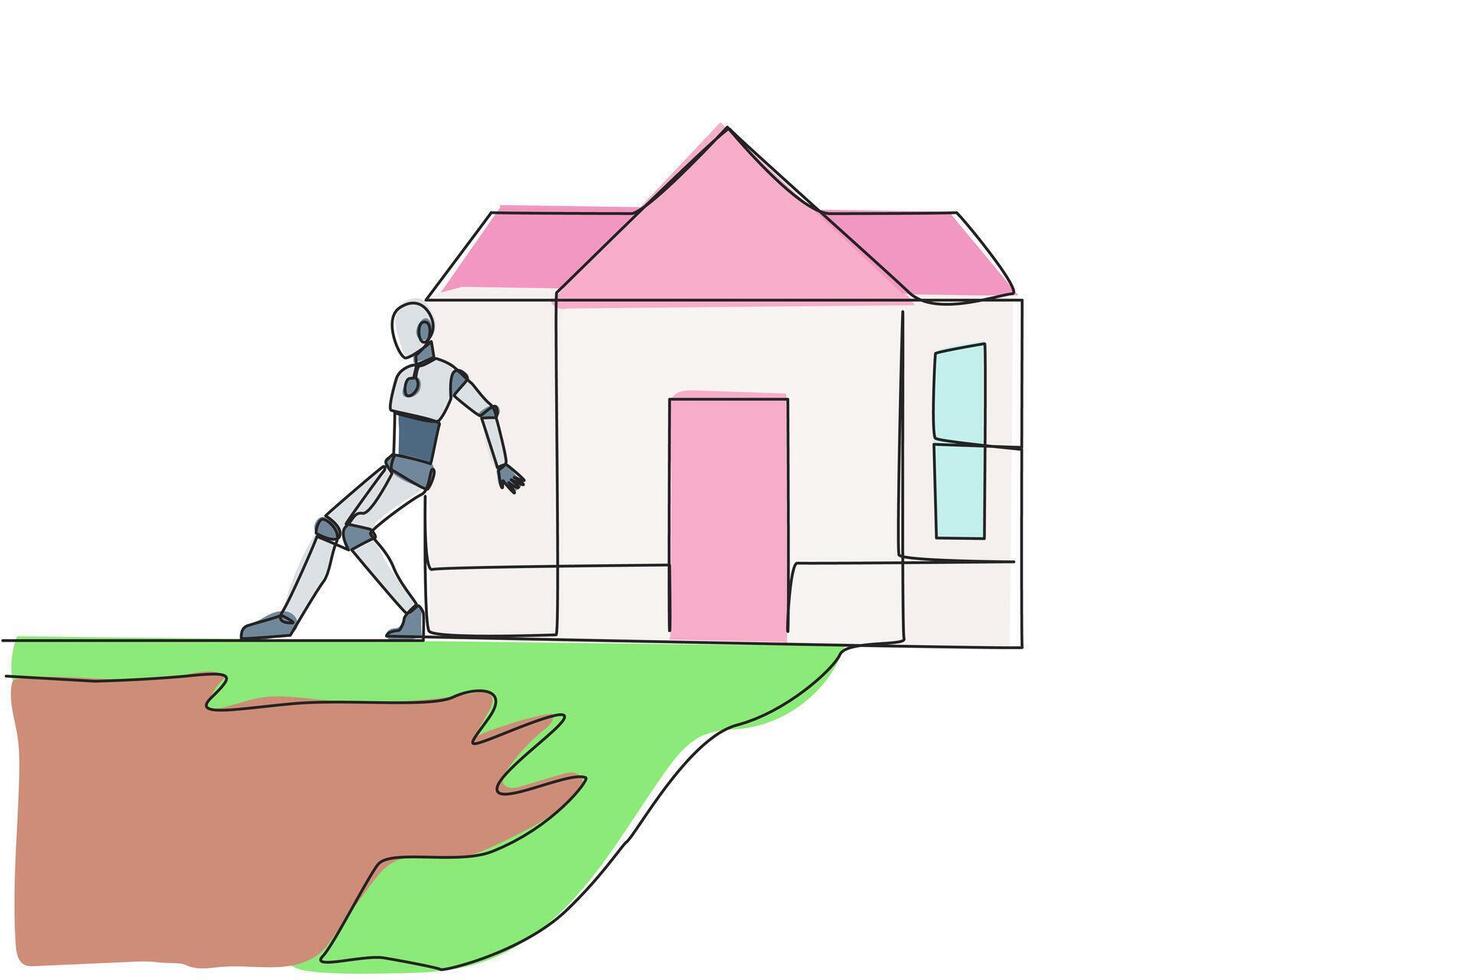 Continuous one line drawing robot pushes miniature house down with its back from the edge of the cliff. Robot training house. Future technology development. Single line draw design vector illustration